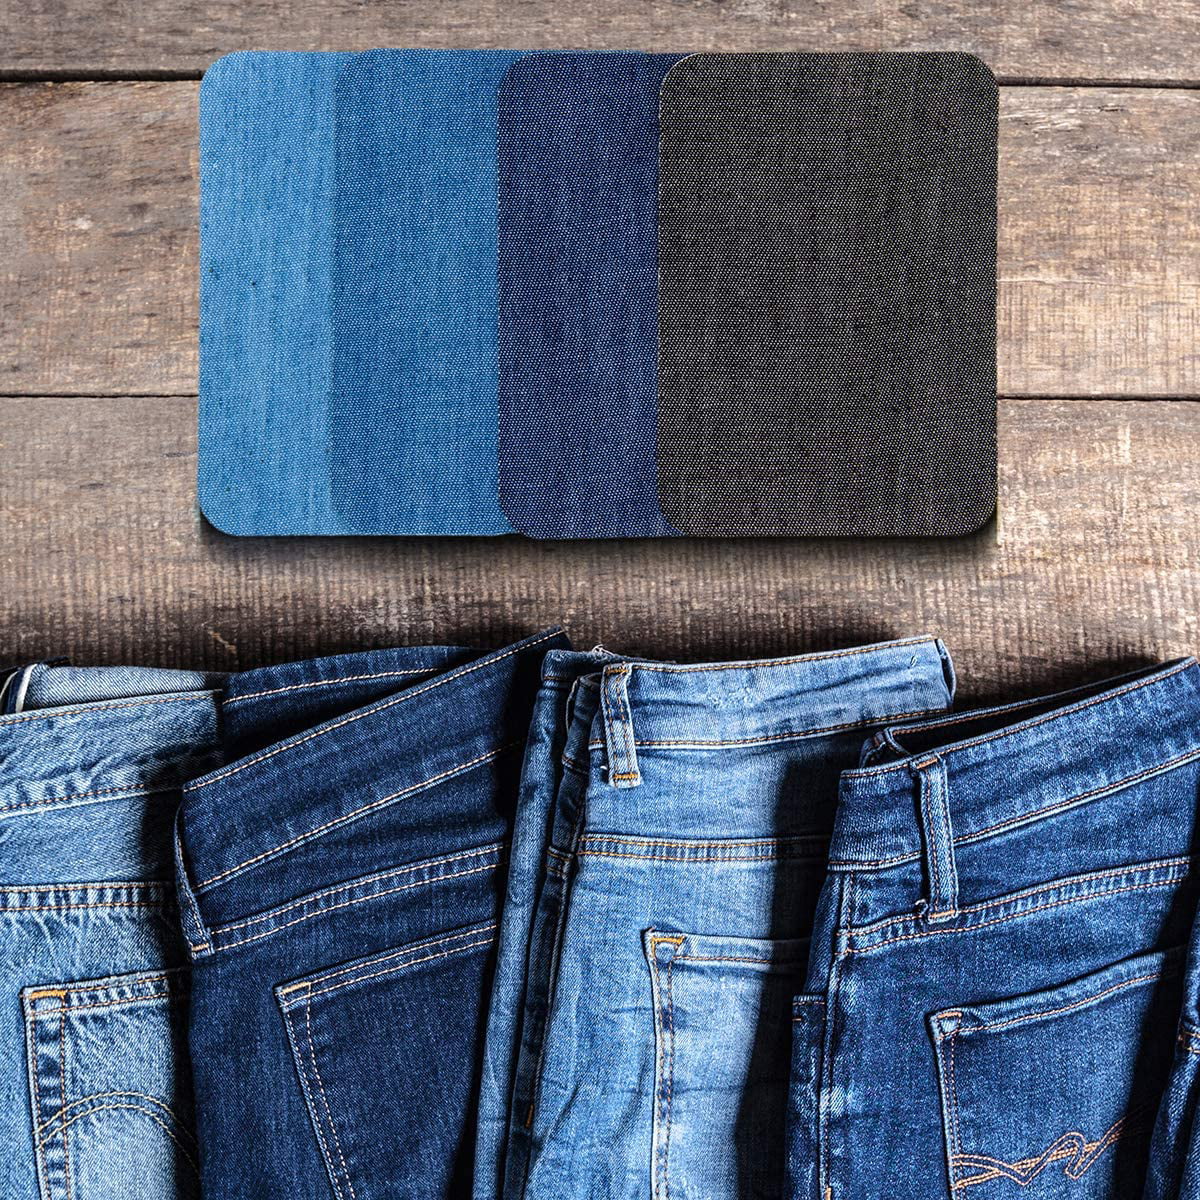 Exceptional Quality Iron-On Jean Patches Repair Kit. Inside & Outside. Made with The Strongest Glue, 100% Cotton Assorted Shades of Blue. 20 Pieces